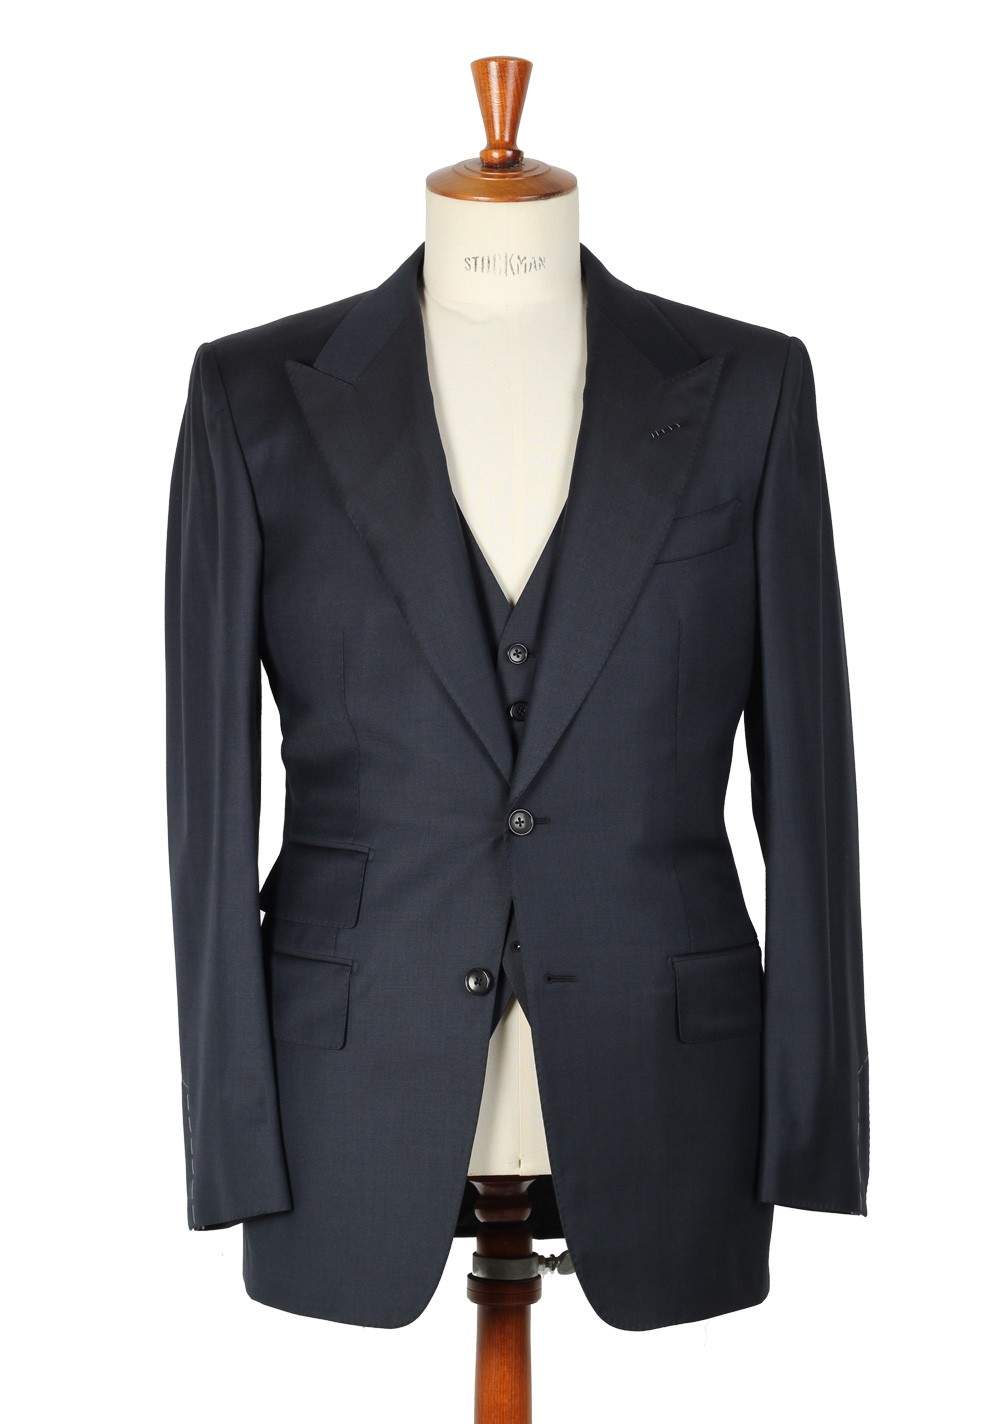 2015 Tom Ford 3 piece suit in blue in multiple sizes | Styleforum